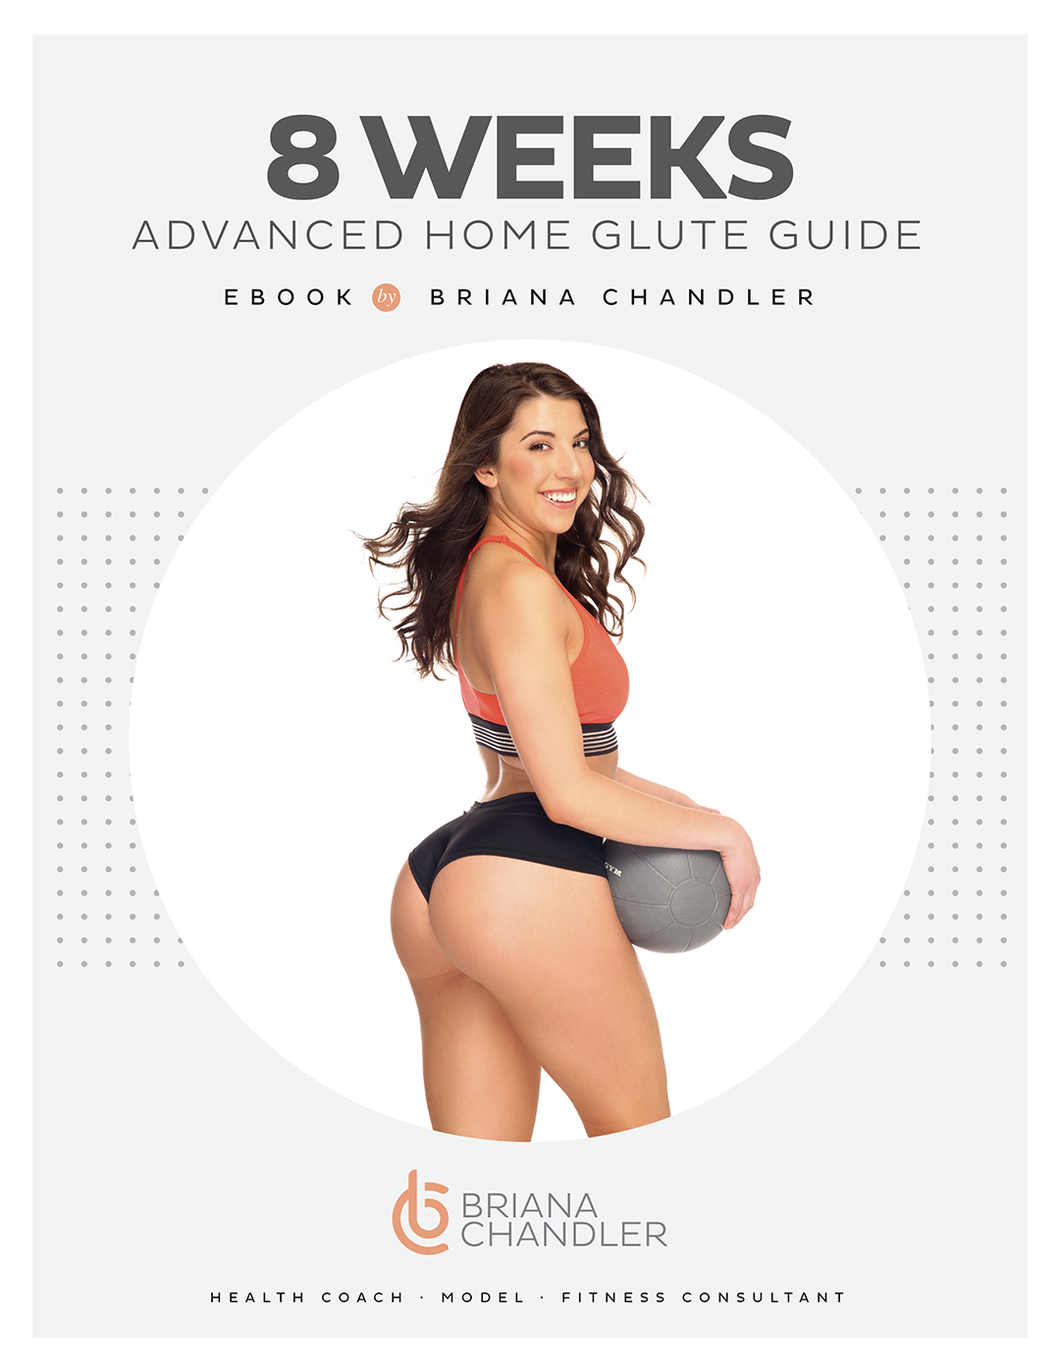 8 WEEKS ADVANCED HOME GLUTE GUIDE - includes HEALTHY EATS